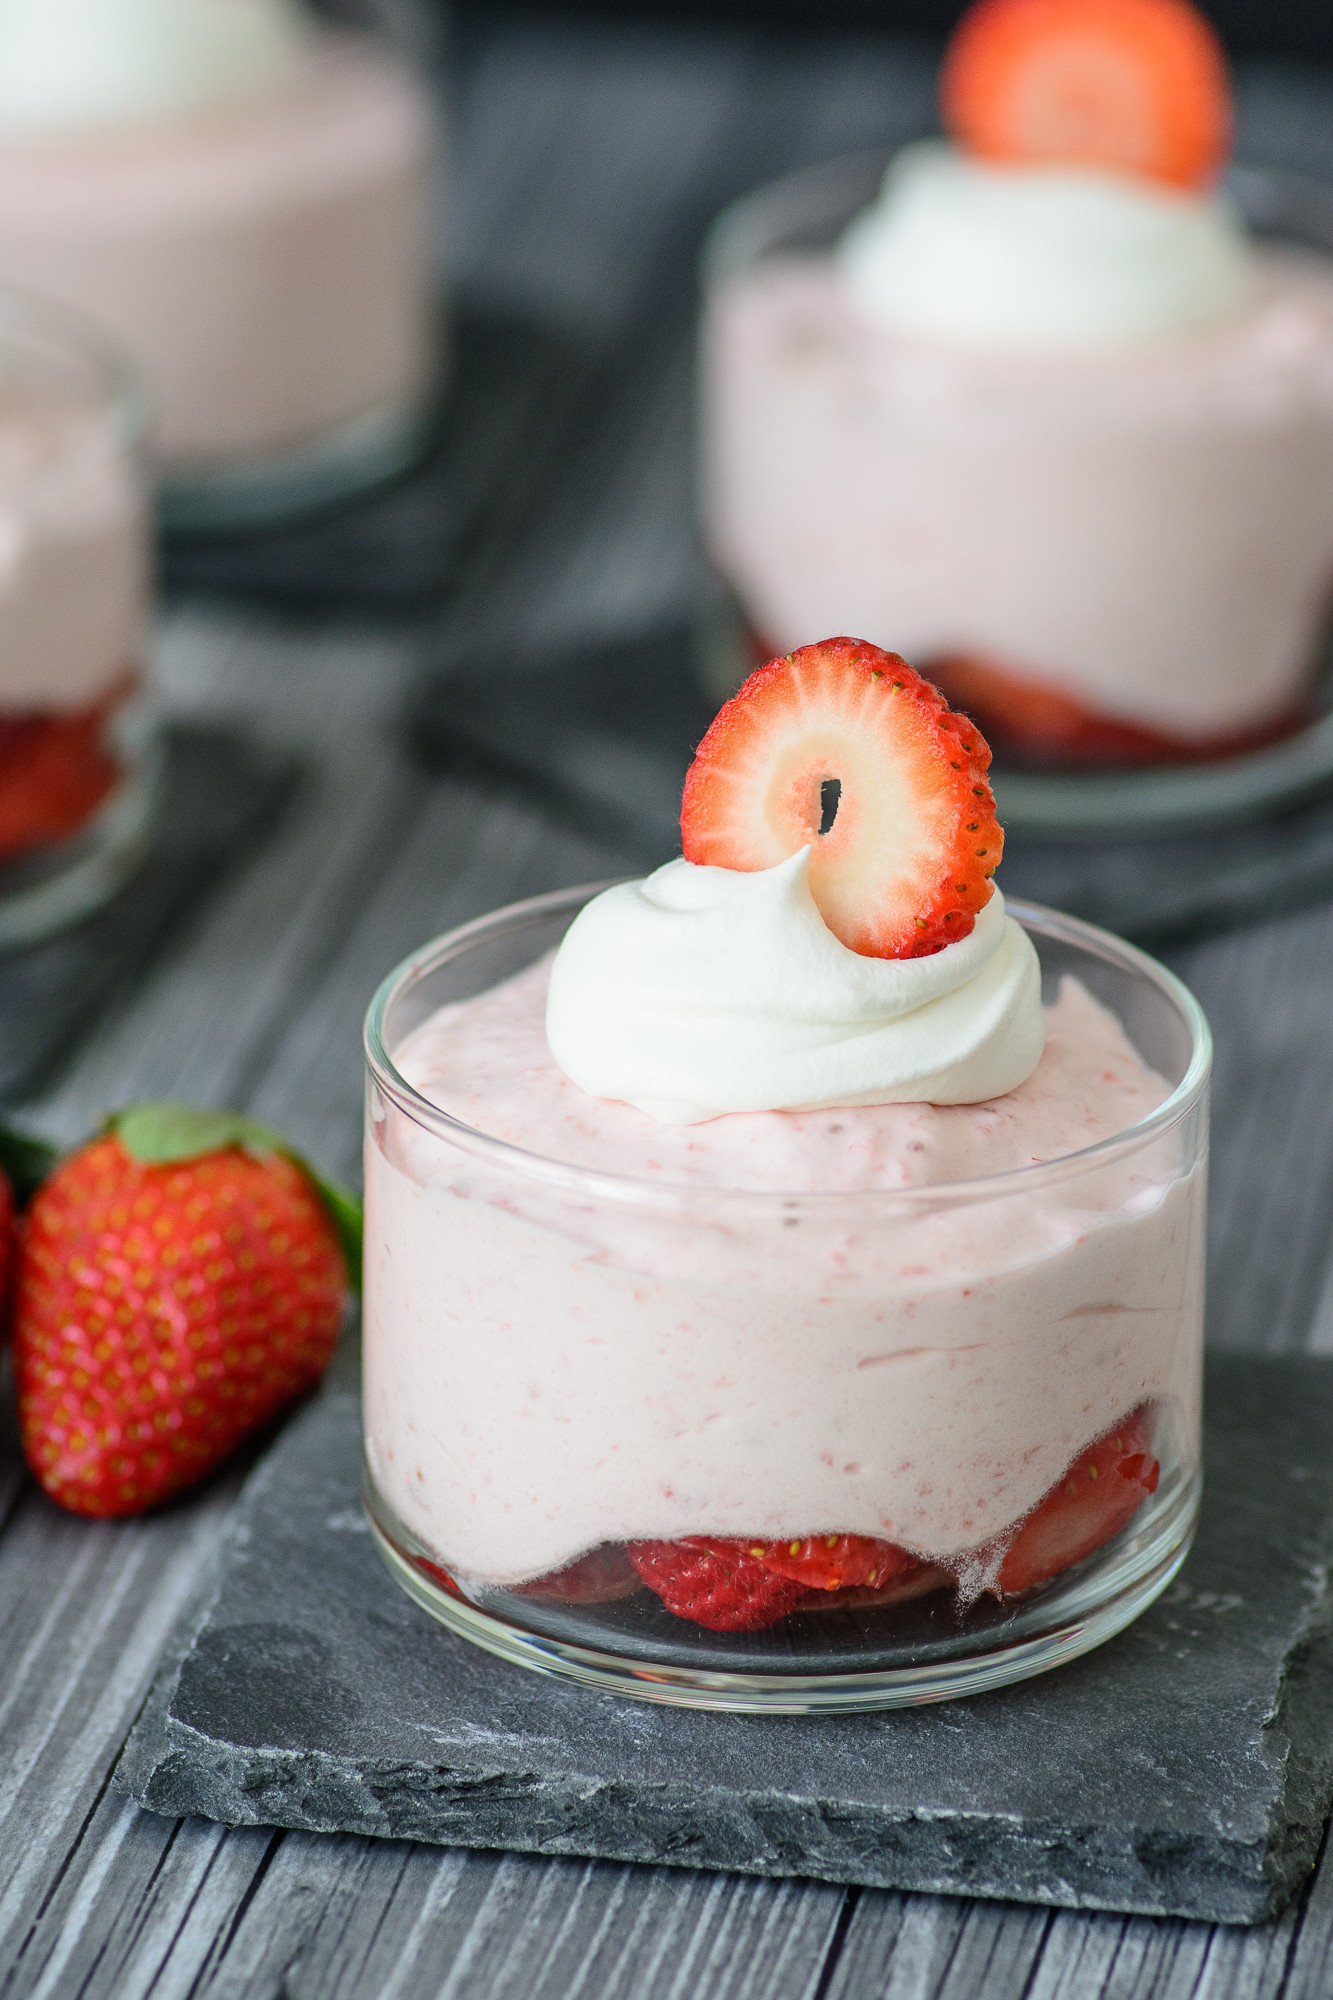 Easy Dessert Recipes For Kids With Few Ingredients
 3 Ingre nt Strawberry Mousse Almost Supermom